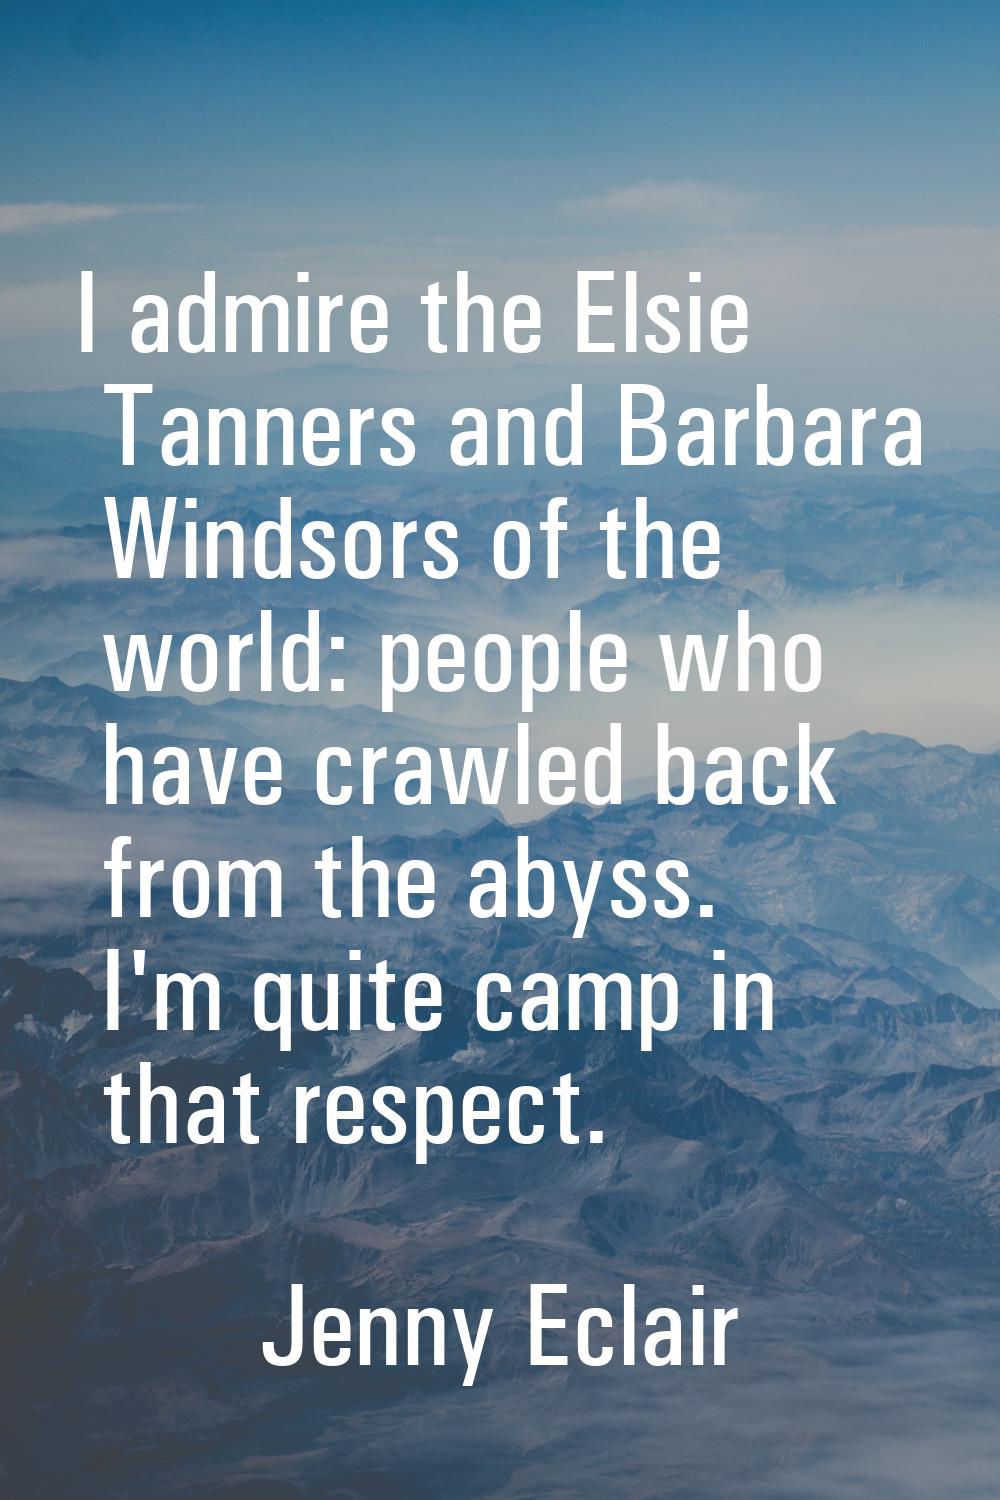 I admire the Elsie Tanners and Barbara Windsors of the world: people who have crawled back from the